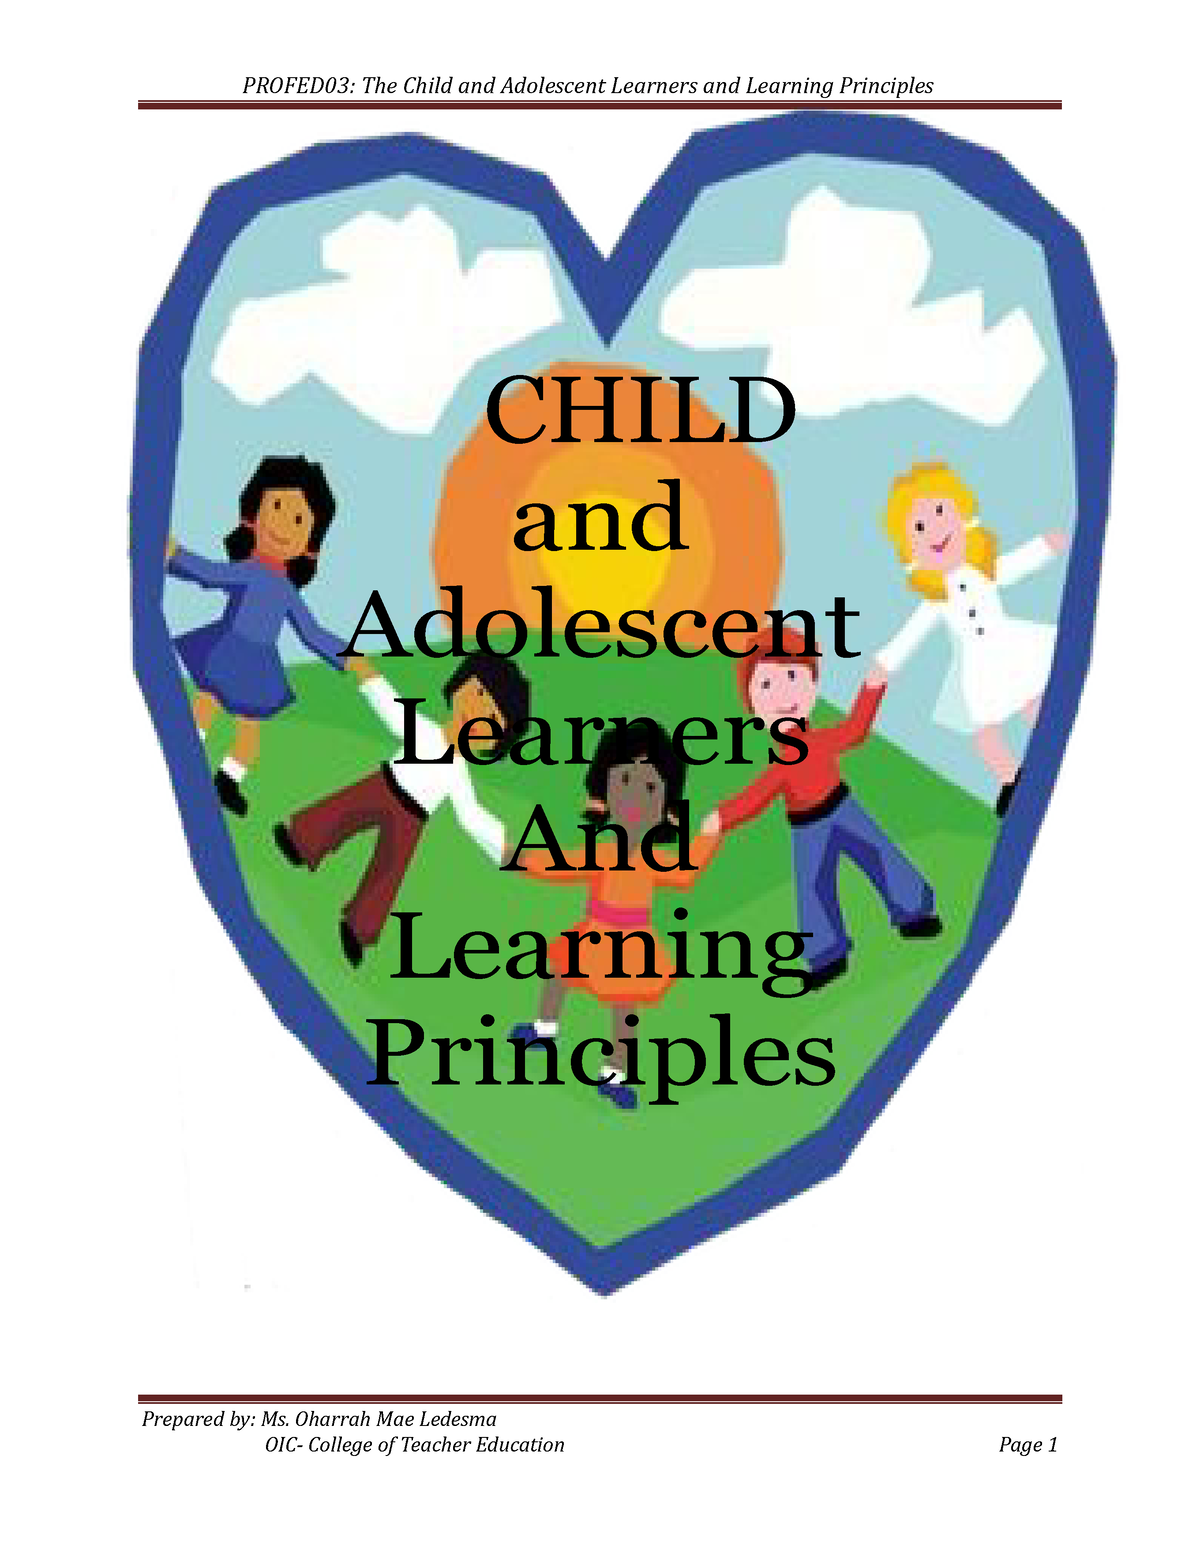 research literature and studies related to child and adolescent learners